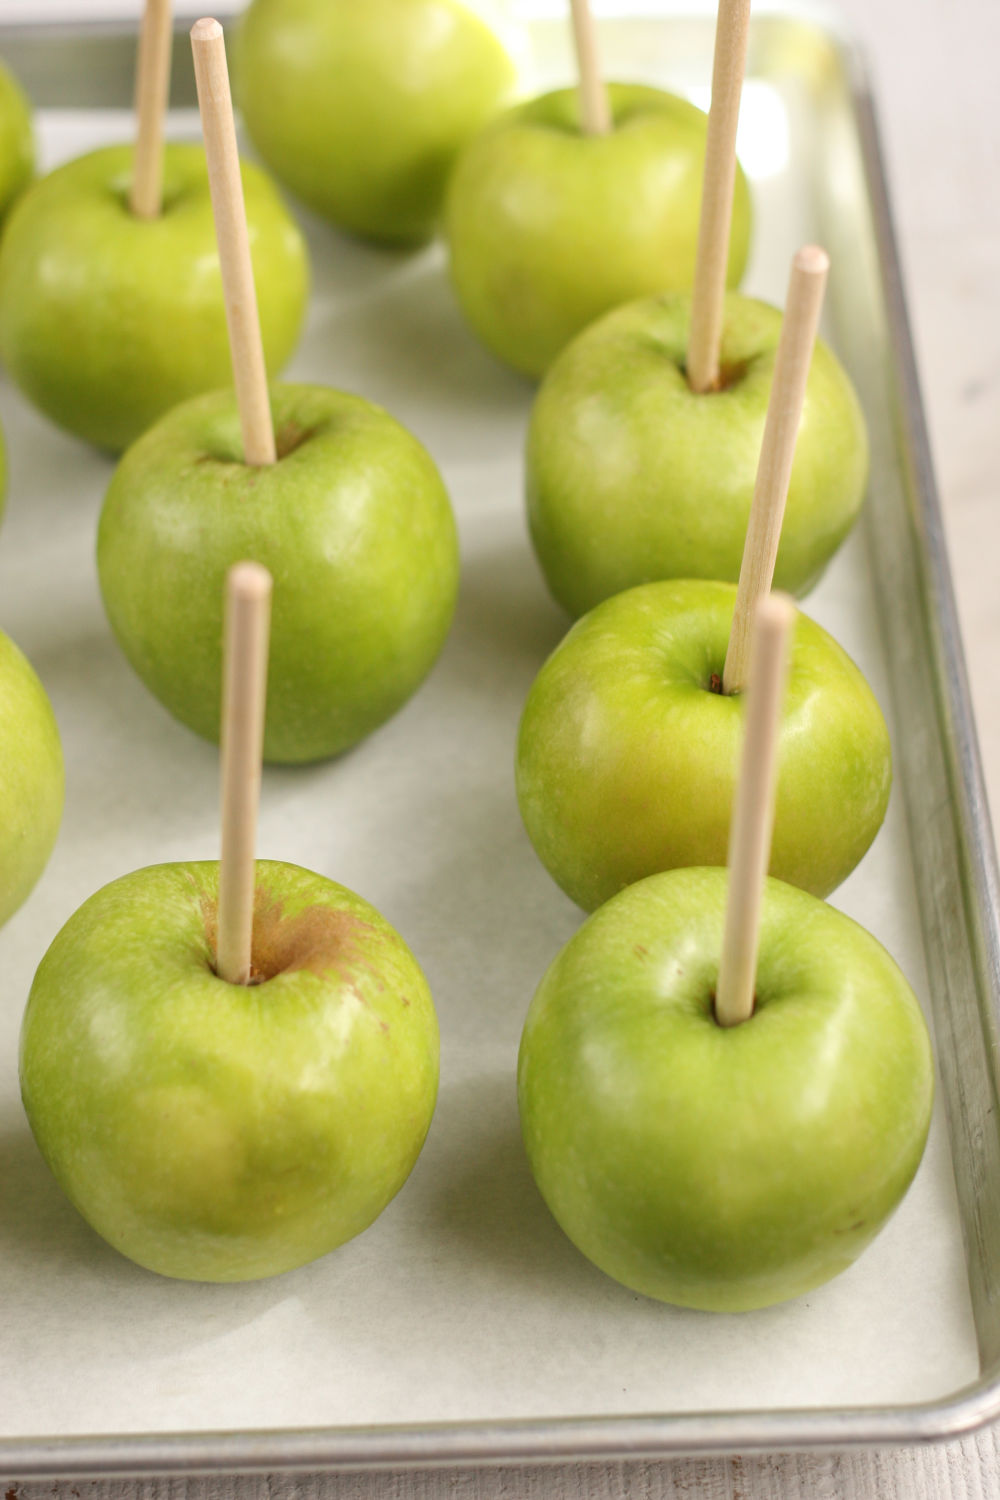 Granny Smith apples with wooden sticks inserted on a half sheet pan lined with parchment paper.